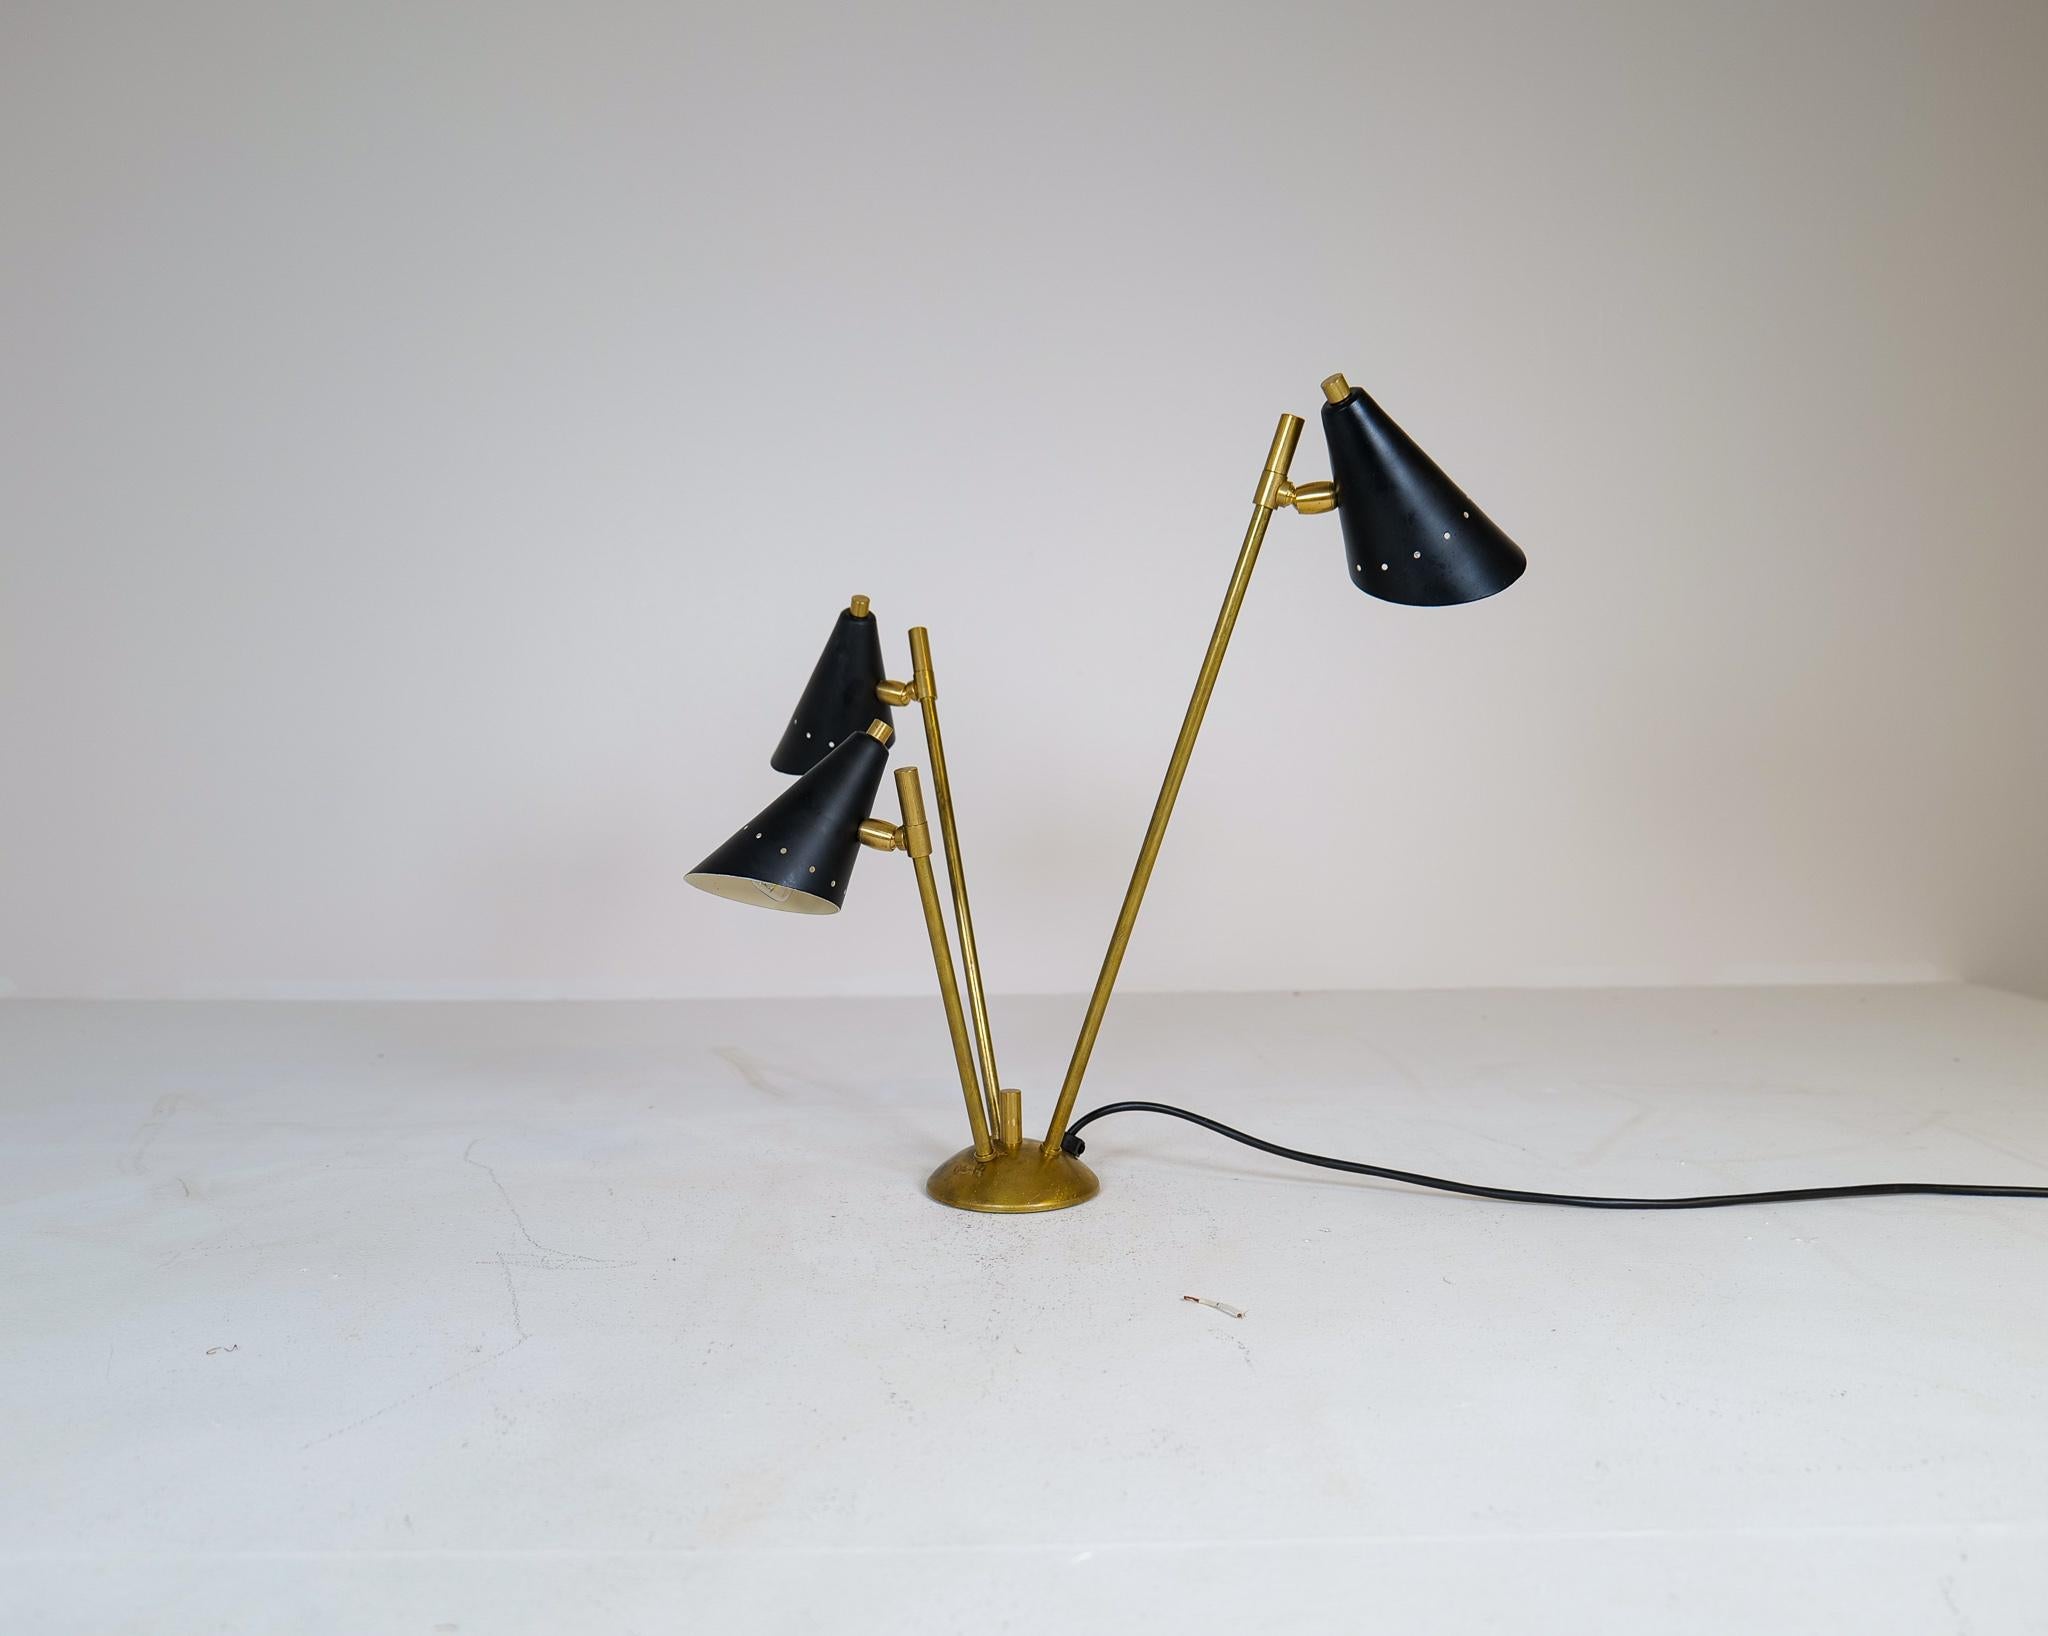 Wonderful Italian modern table lamp. This sculptural lamp has three light sources with. Made with brass and painted sheet metal. Lampshades are adjustable and can light in different directions. 

Good vintage condition, brass with some